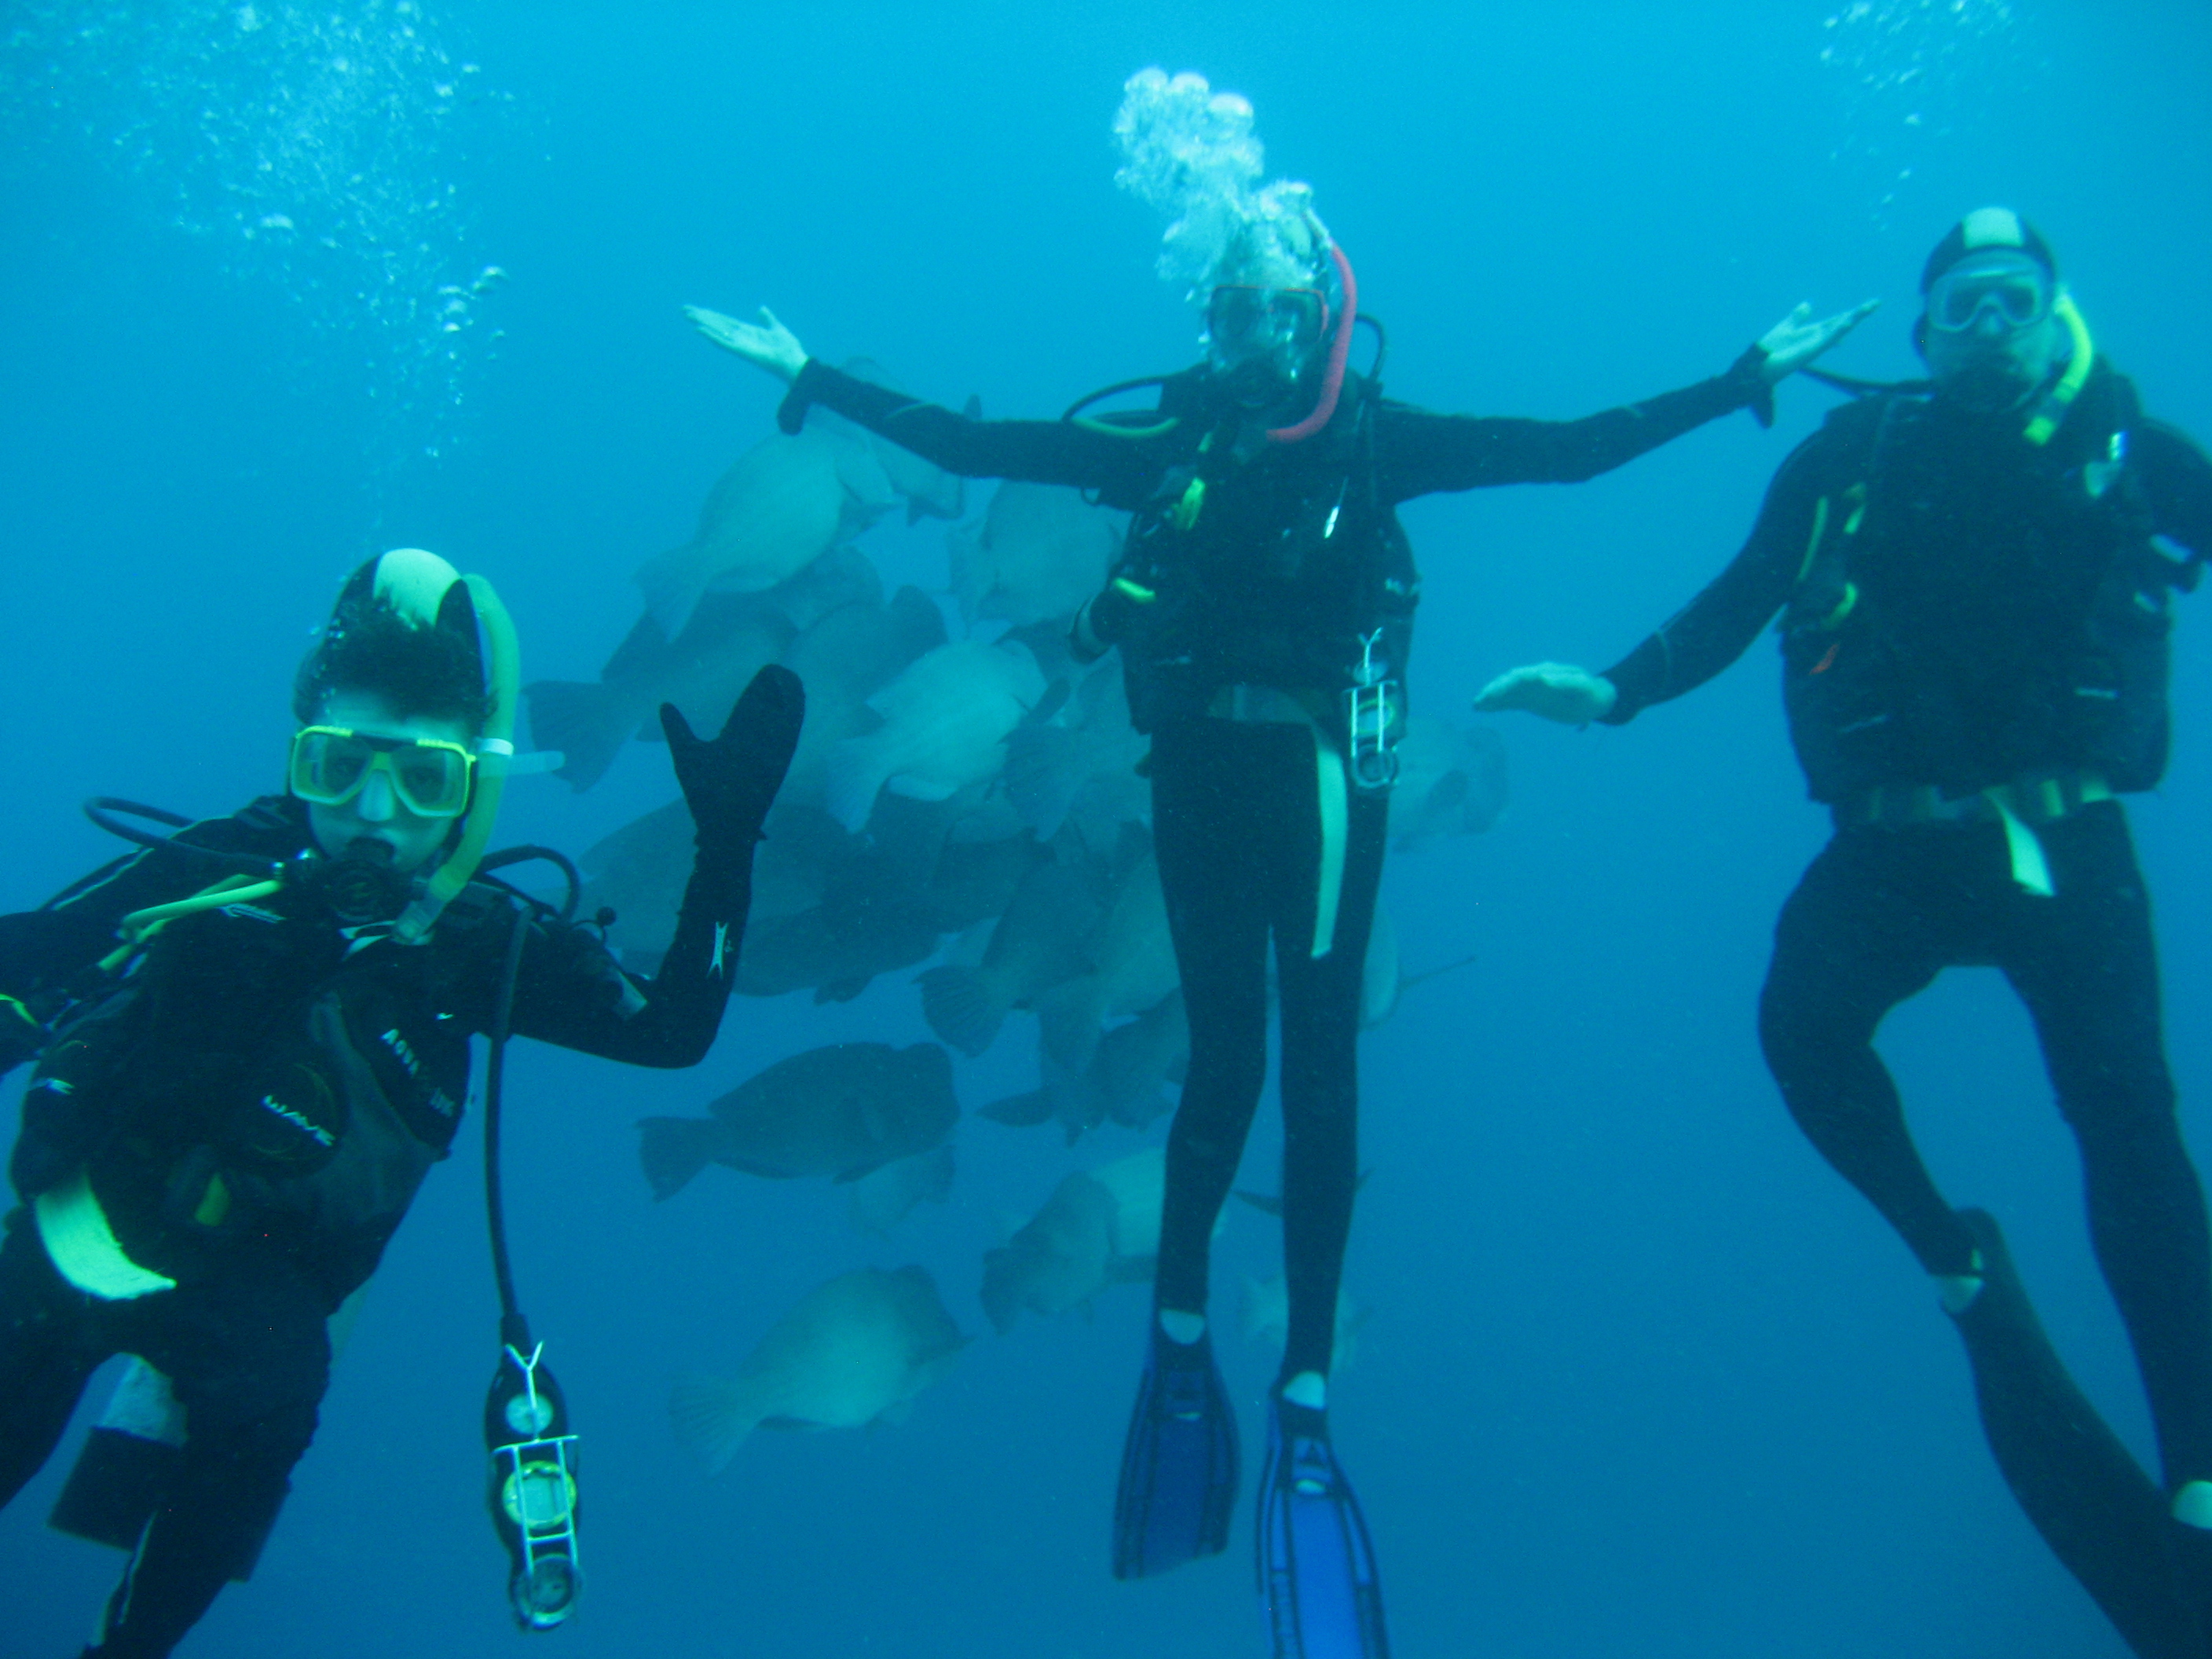 Nicholas Neve and parents scuba diving the Great Barrier Reef. Nicholas in foreground